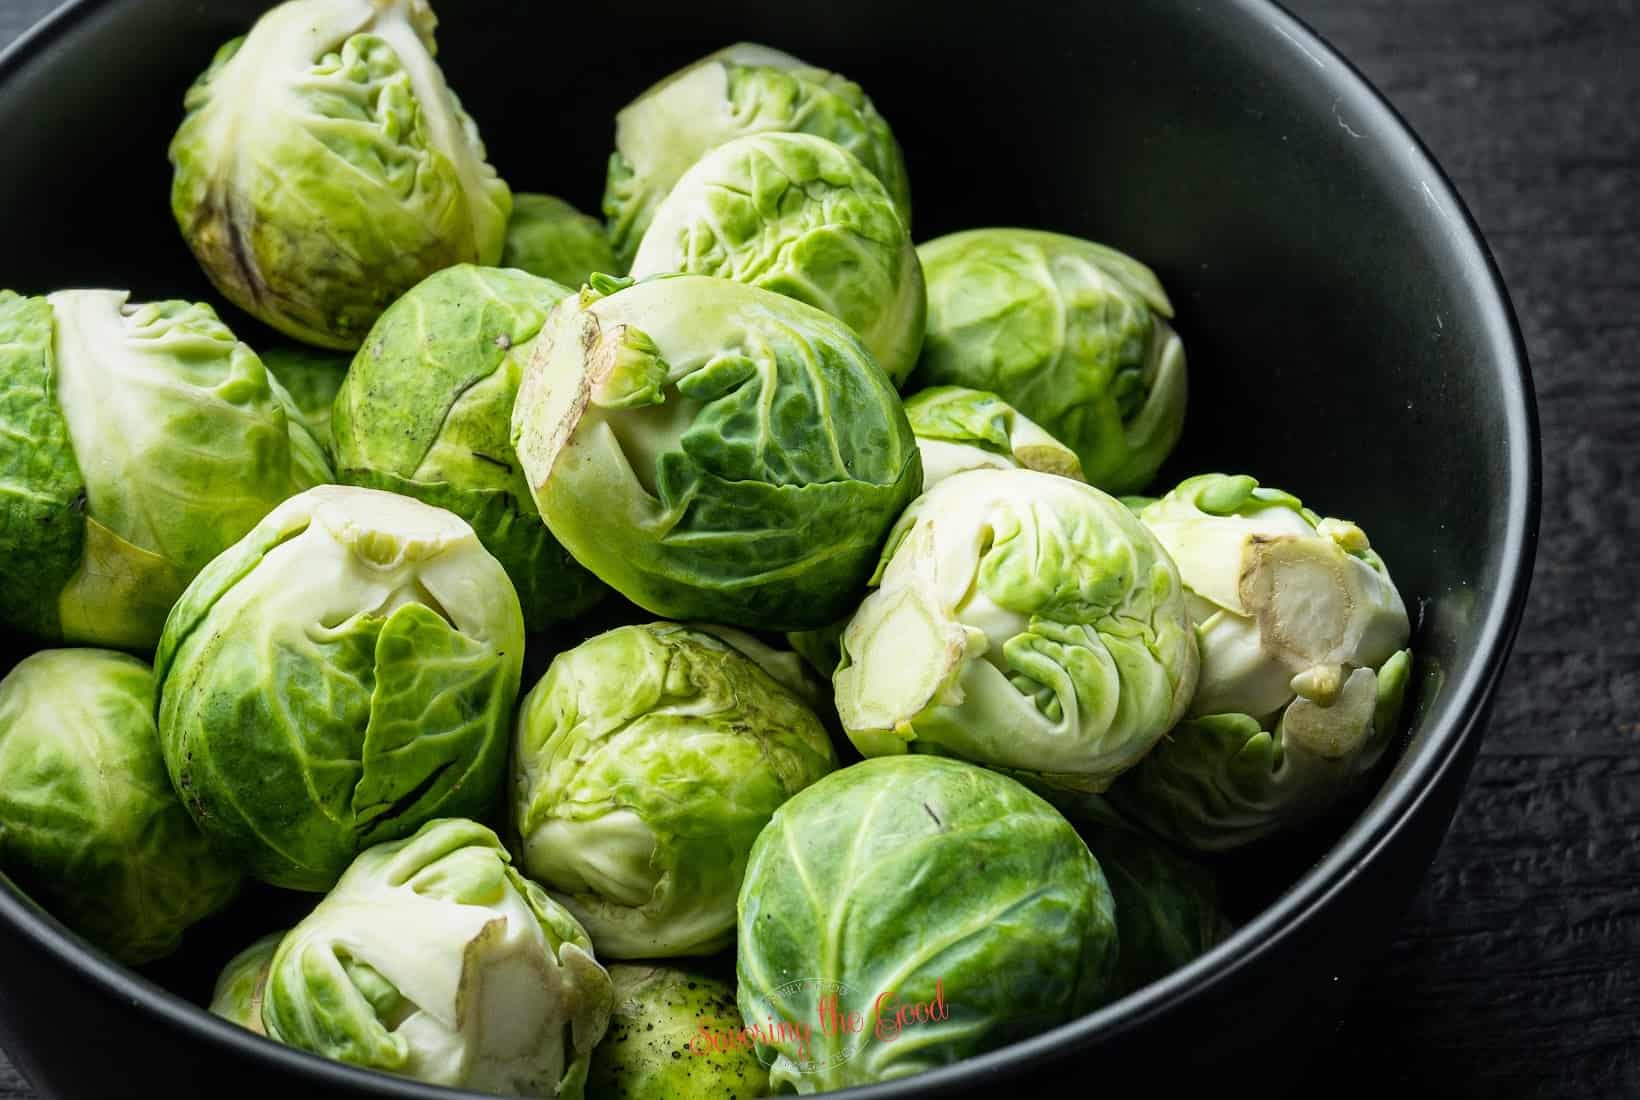 Brussels sprouts in a bowl on a table.